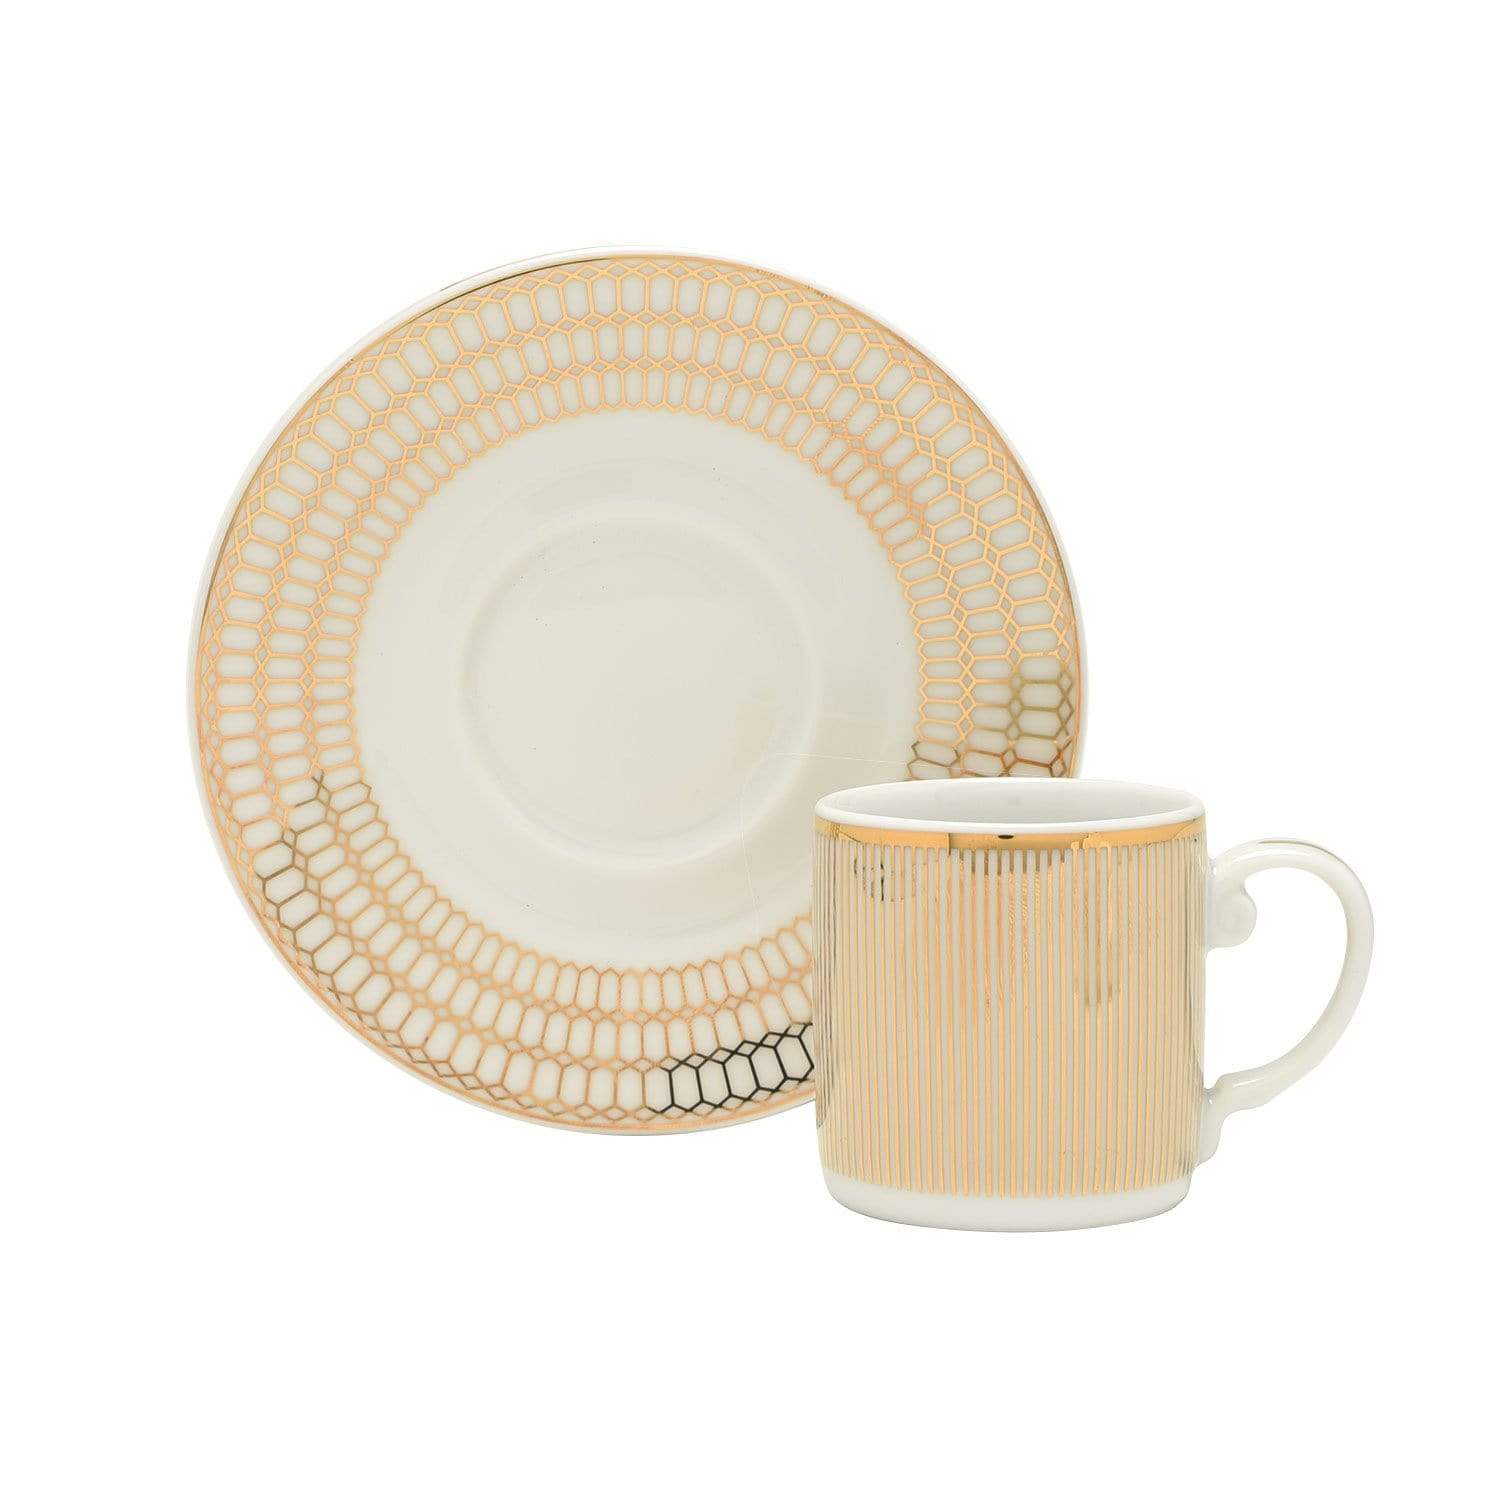 Dankotuwa Foster Gold 6+6 Demitasse Coffee Cup And Saucer - Fost-11792/693/6-G